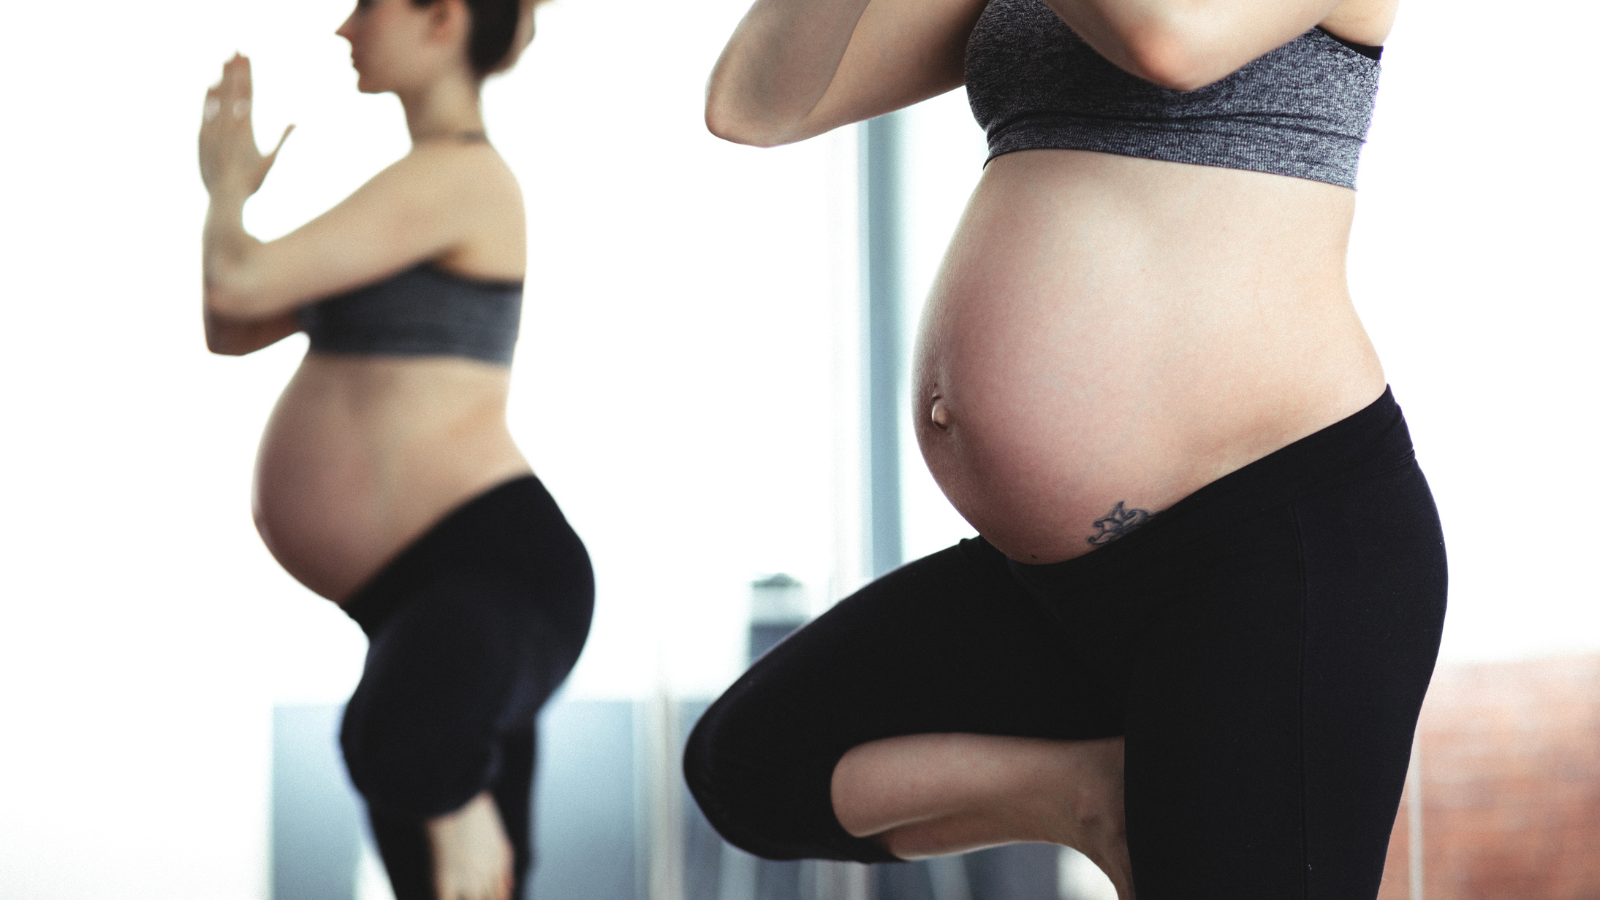 The Top 3 Questions for a Healthy Pregnancy